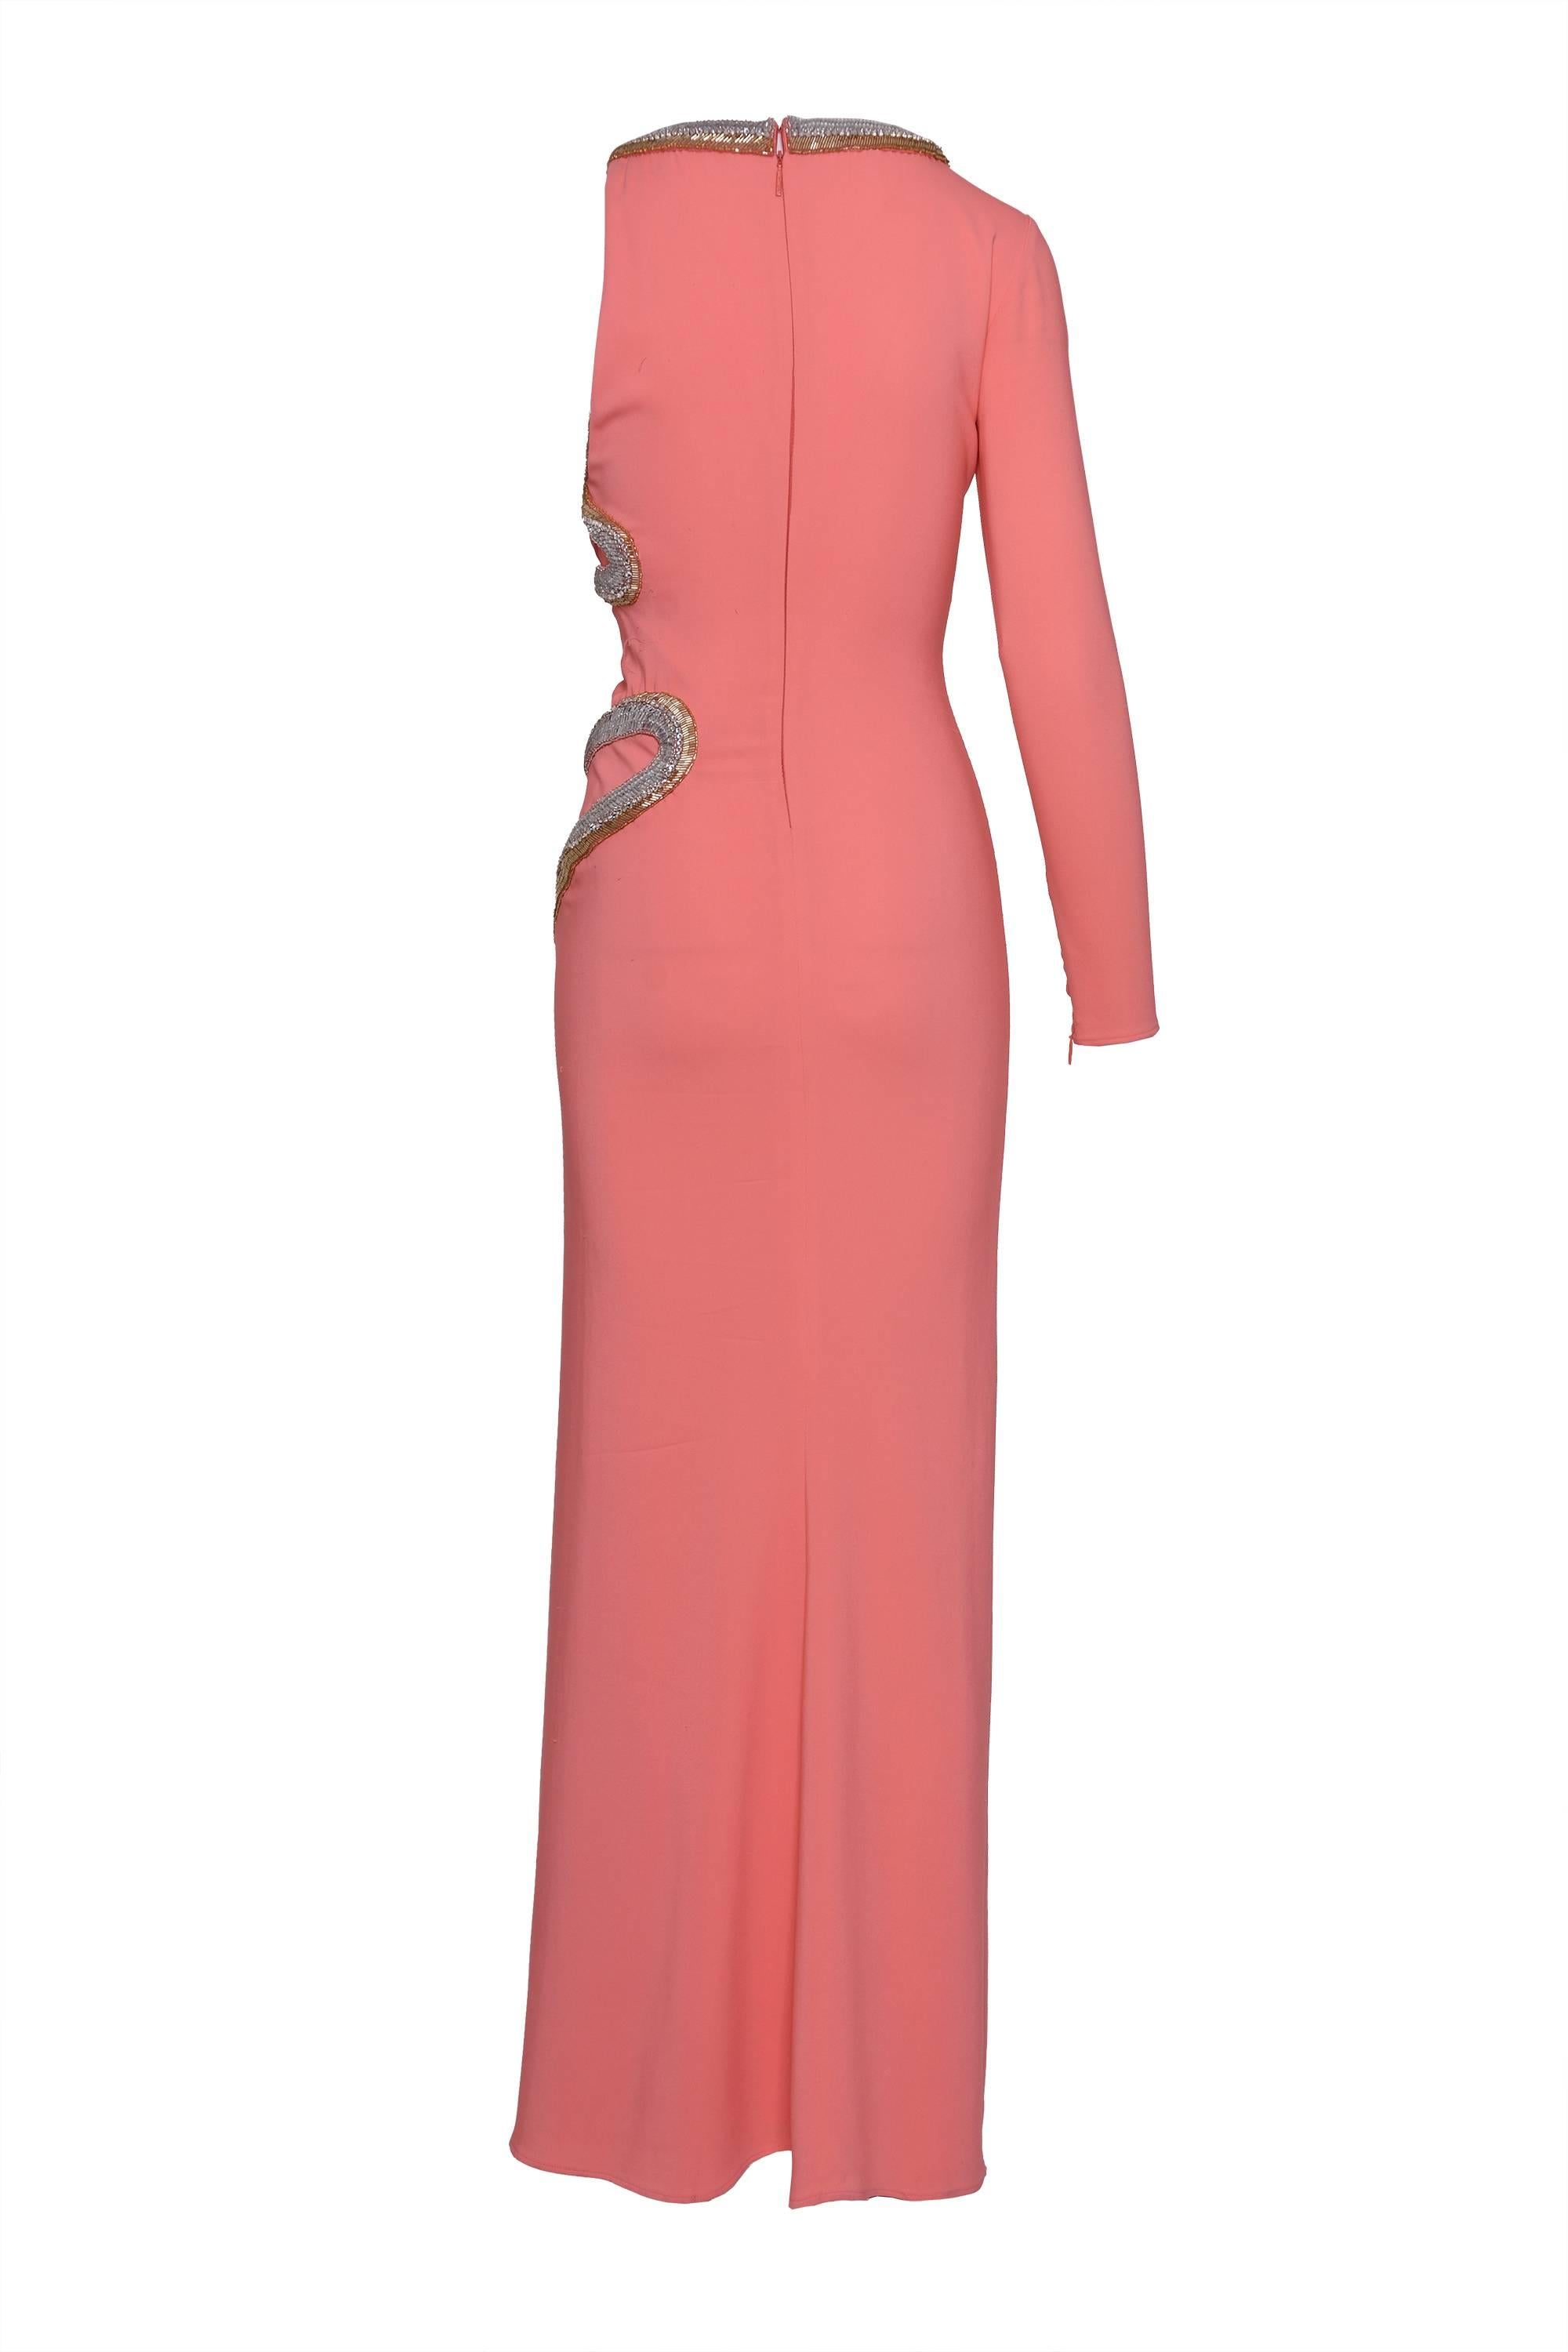 Roberto Cavalli Long Dress in pink salmon with snake embroidery Roberto Cavalli slinky knit gown.
Two-tone beaded snake wraps around neck and falls down side of dress, round neckline, one long sleeve and one minimally covered left shoulder, rightly